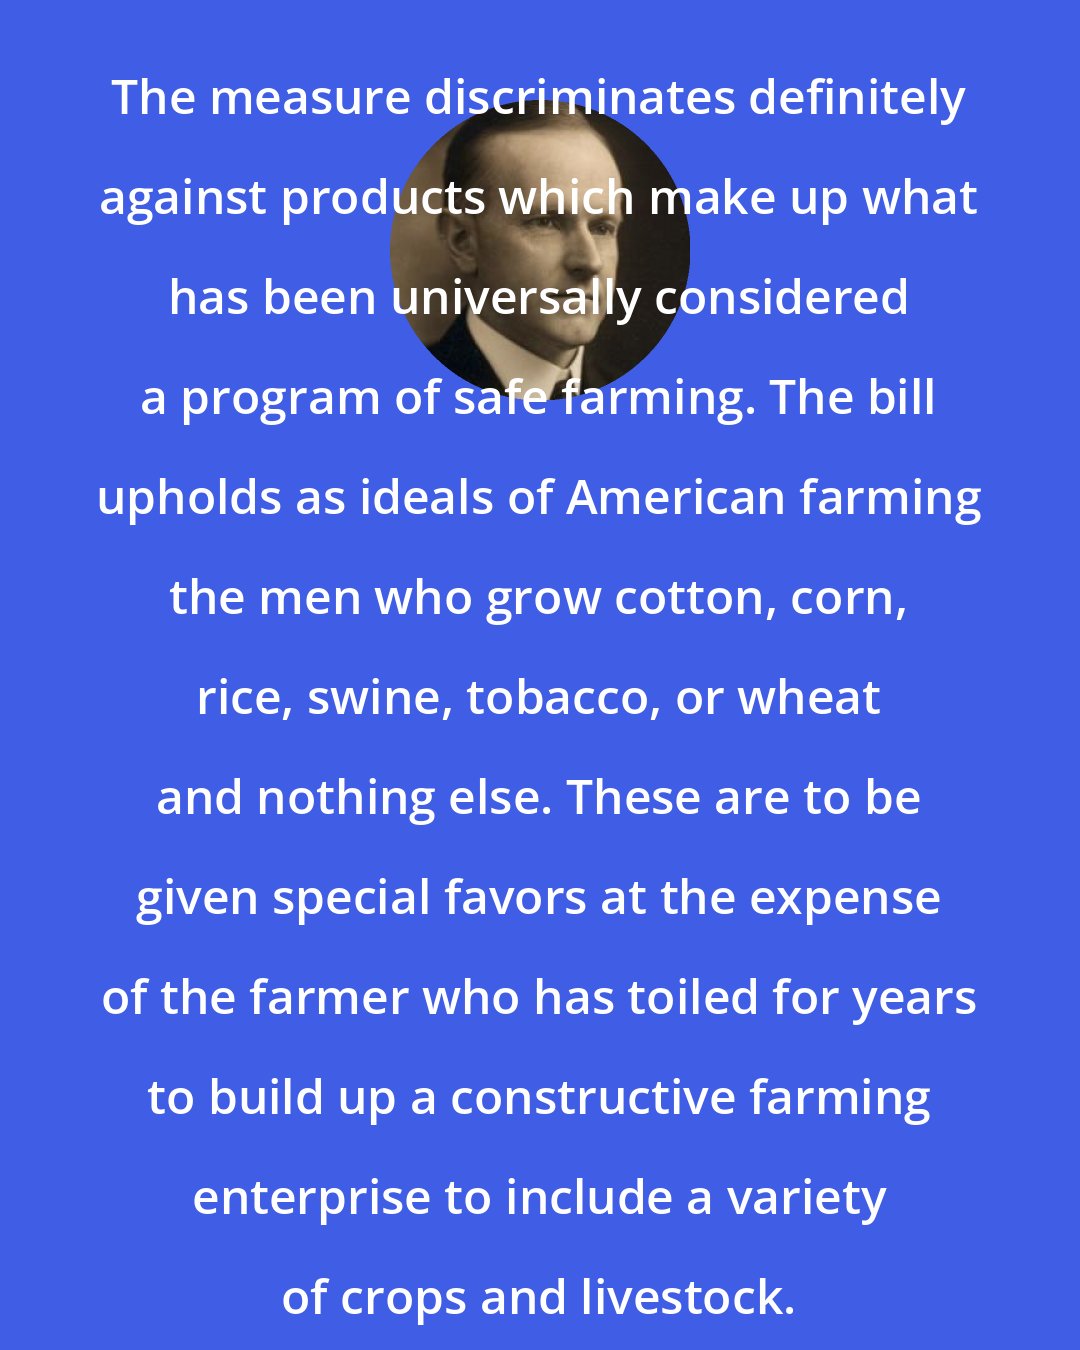 Calvin Coolidge: The measure discriminates definitely against products which make up what has been universally considered a program of safe farming. The bill upholds as ideals of American farming the men who grow cotton, corn, rice, swine, tobacco, or wheat and nothing else. These are to be given special favors at the expense of the farmer who has toiled for years to build up a constructive farming enterprise to include a variety of crops and livestock.